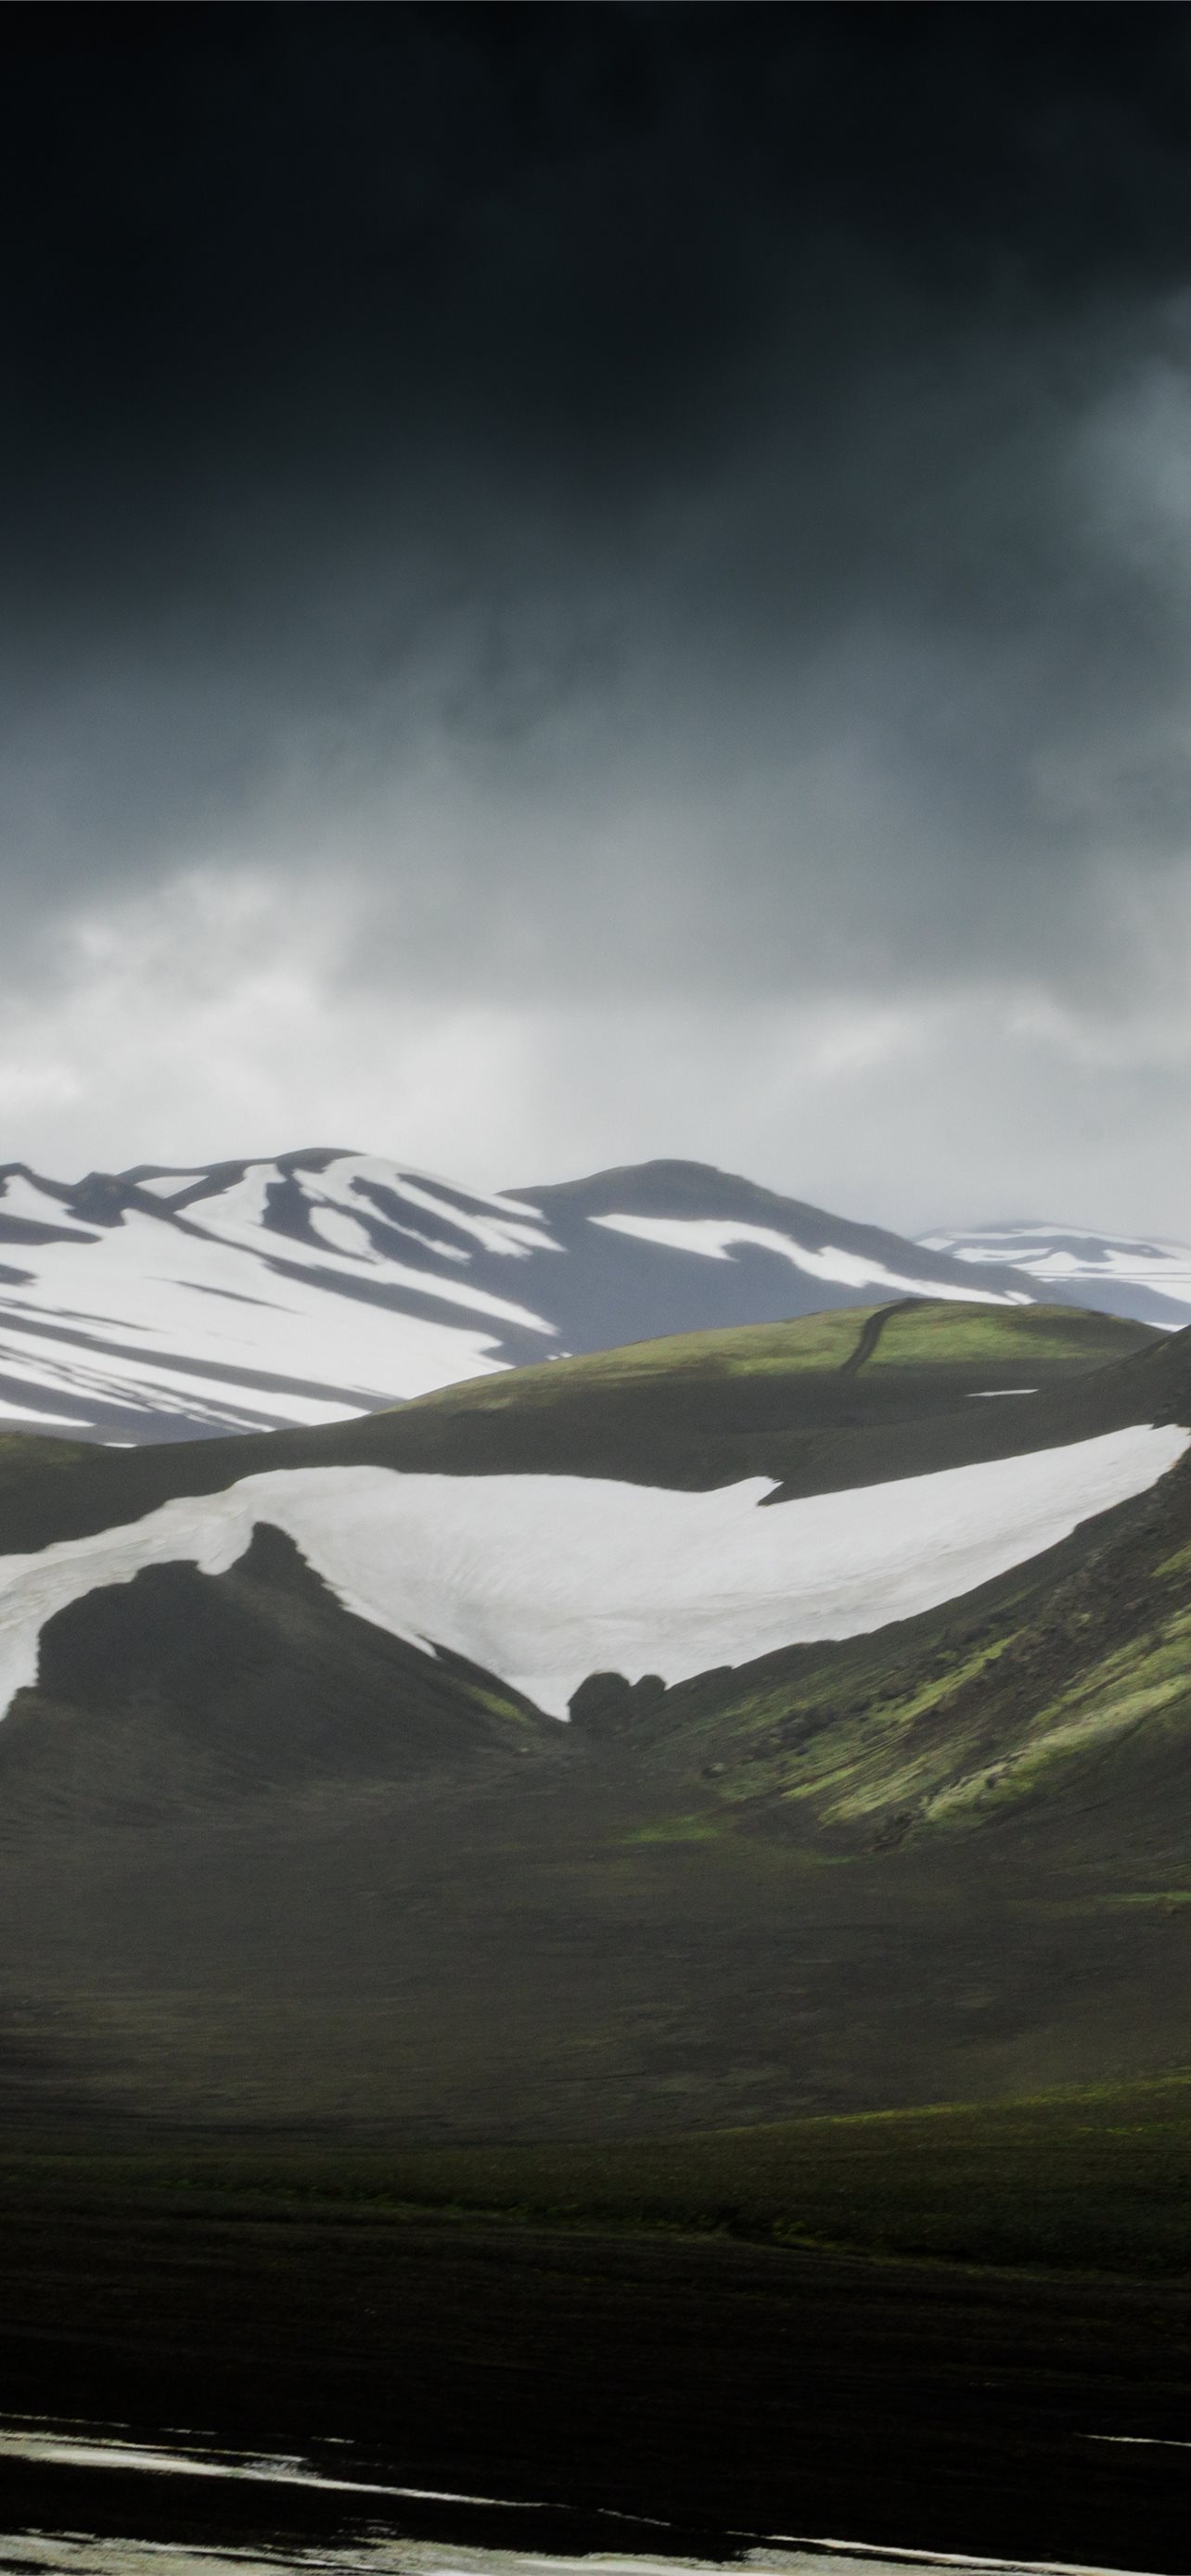 Landscape and mountains cloudy day Iceland Samsung... iPhone wallpaper 